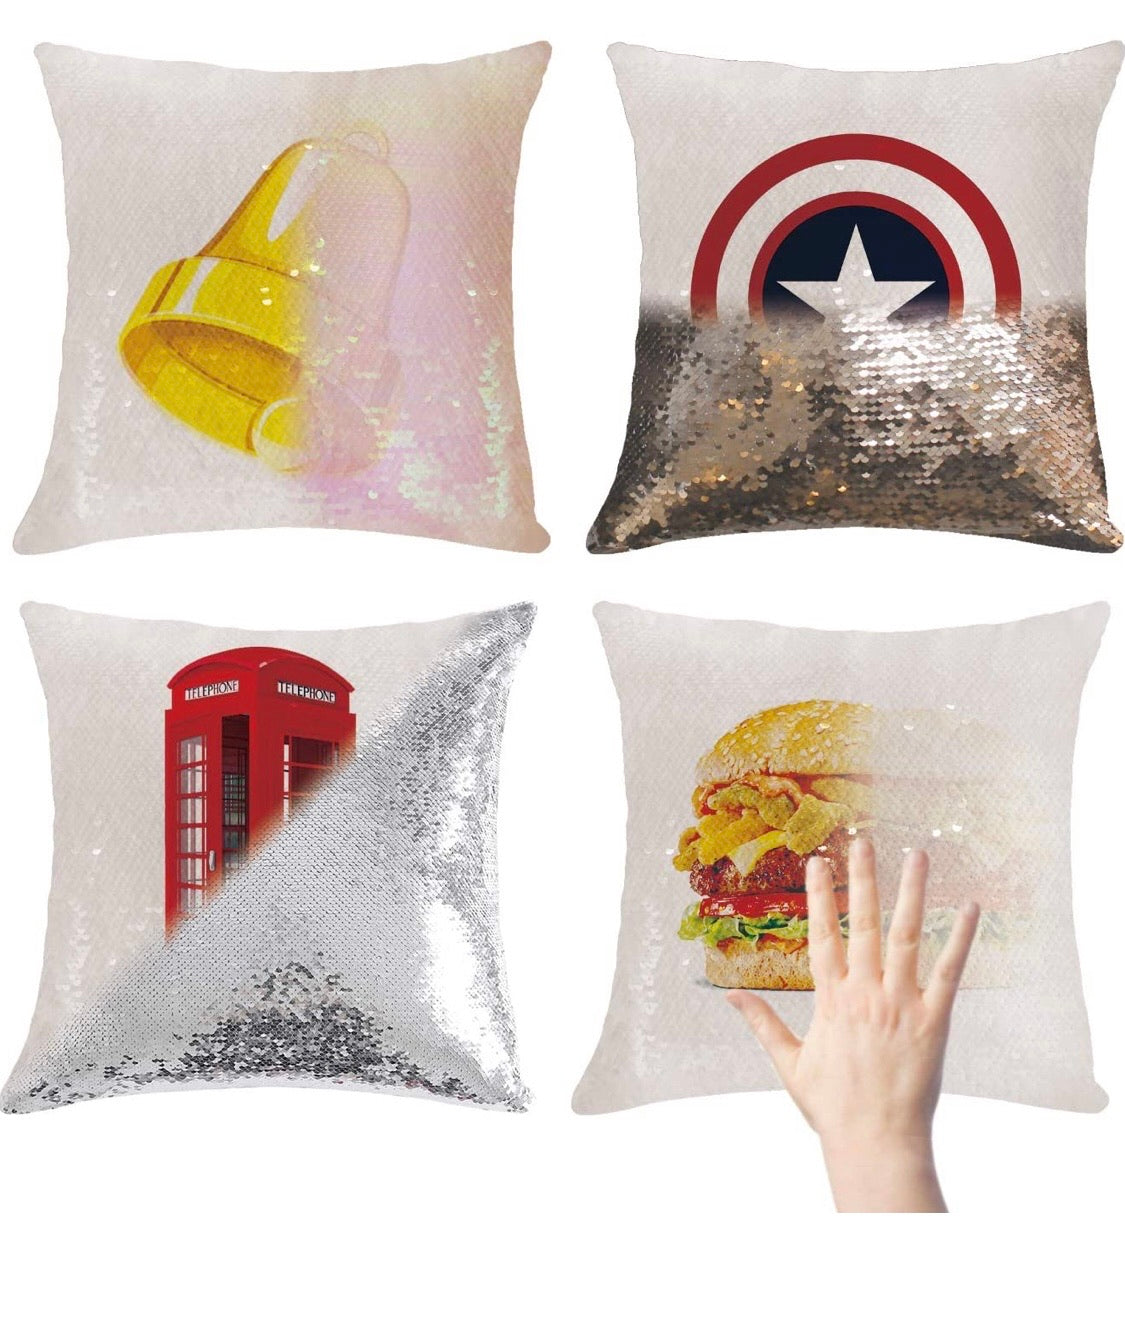 Custom Printed Sequin Throw Pillow Covers (Qty 1)